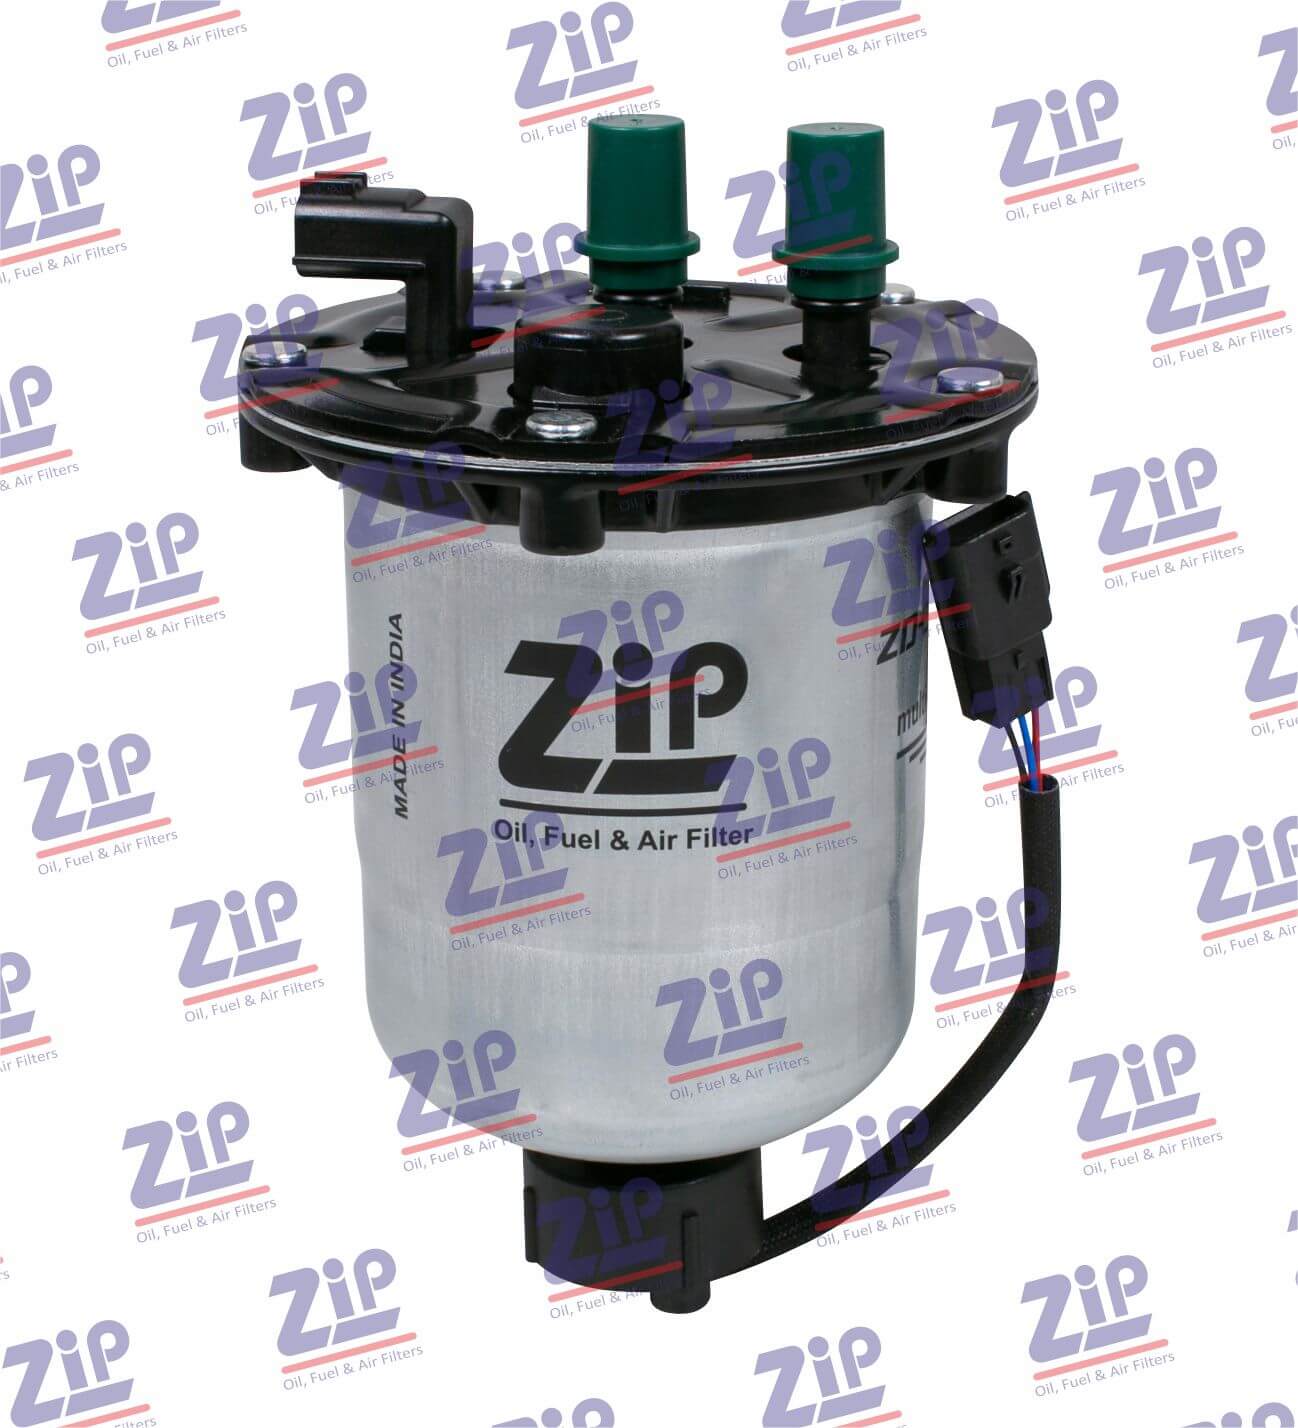 https://www.zipfilters.com/images/products/single/2211291111401.jpg